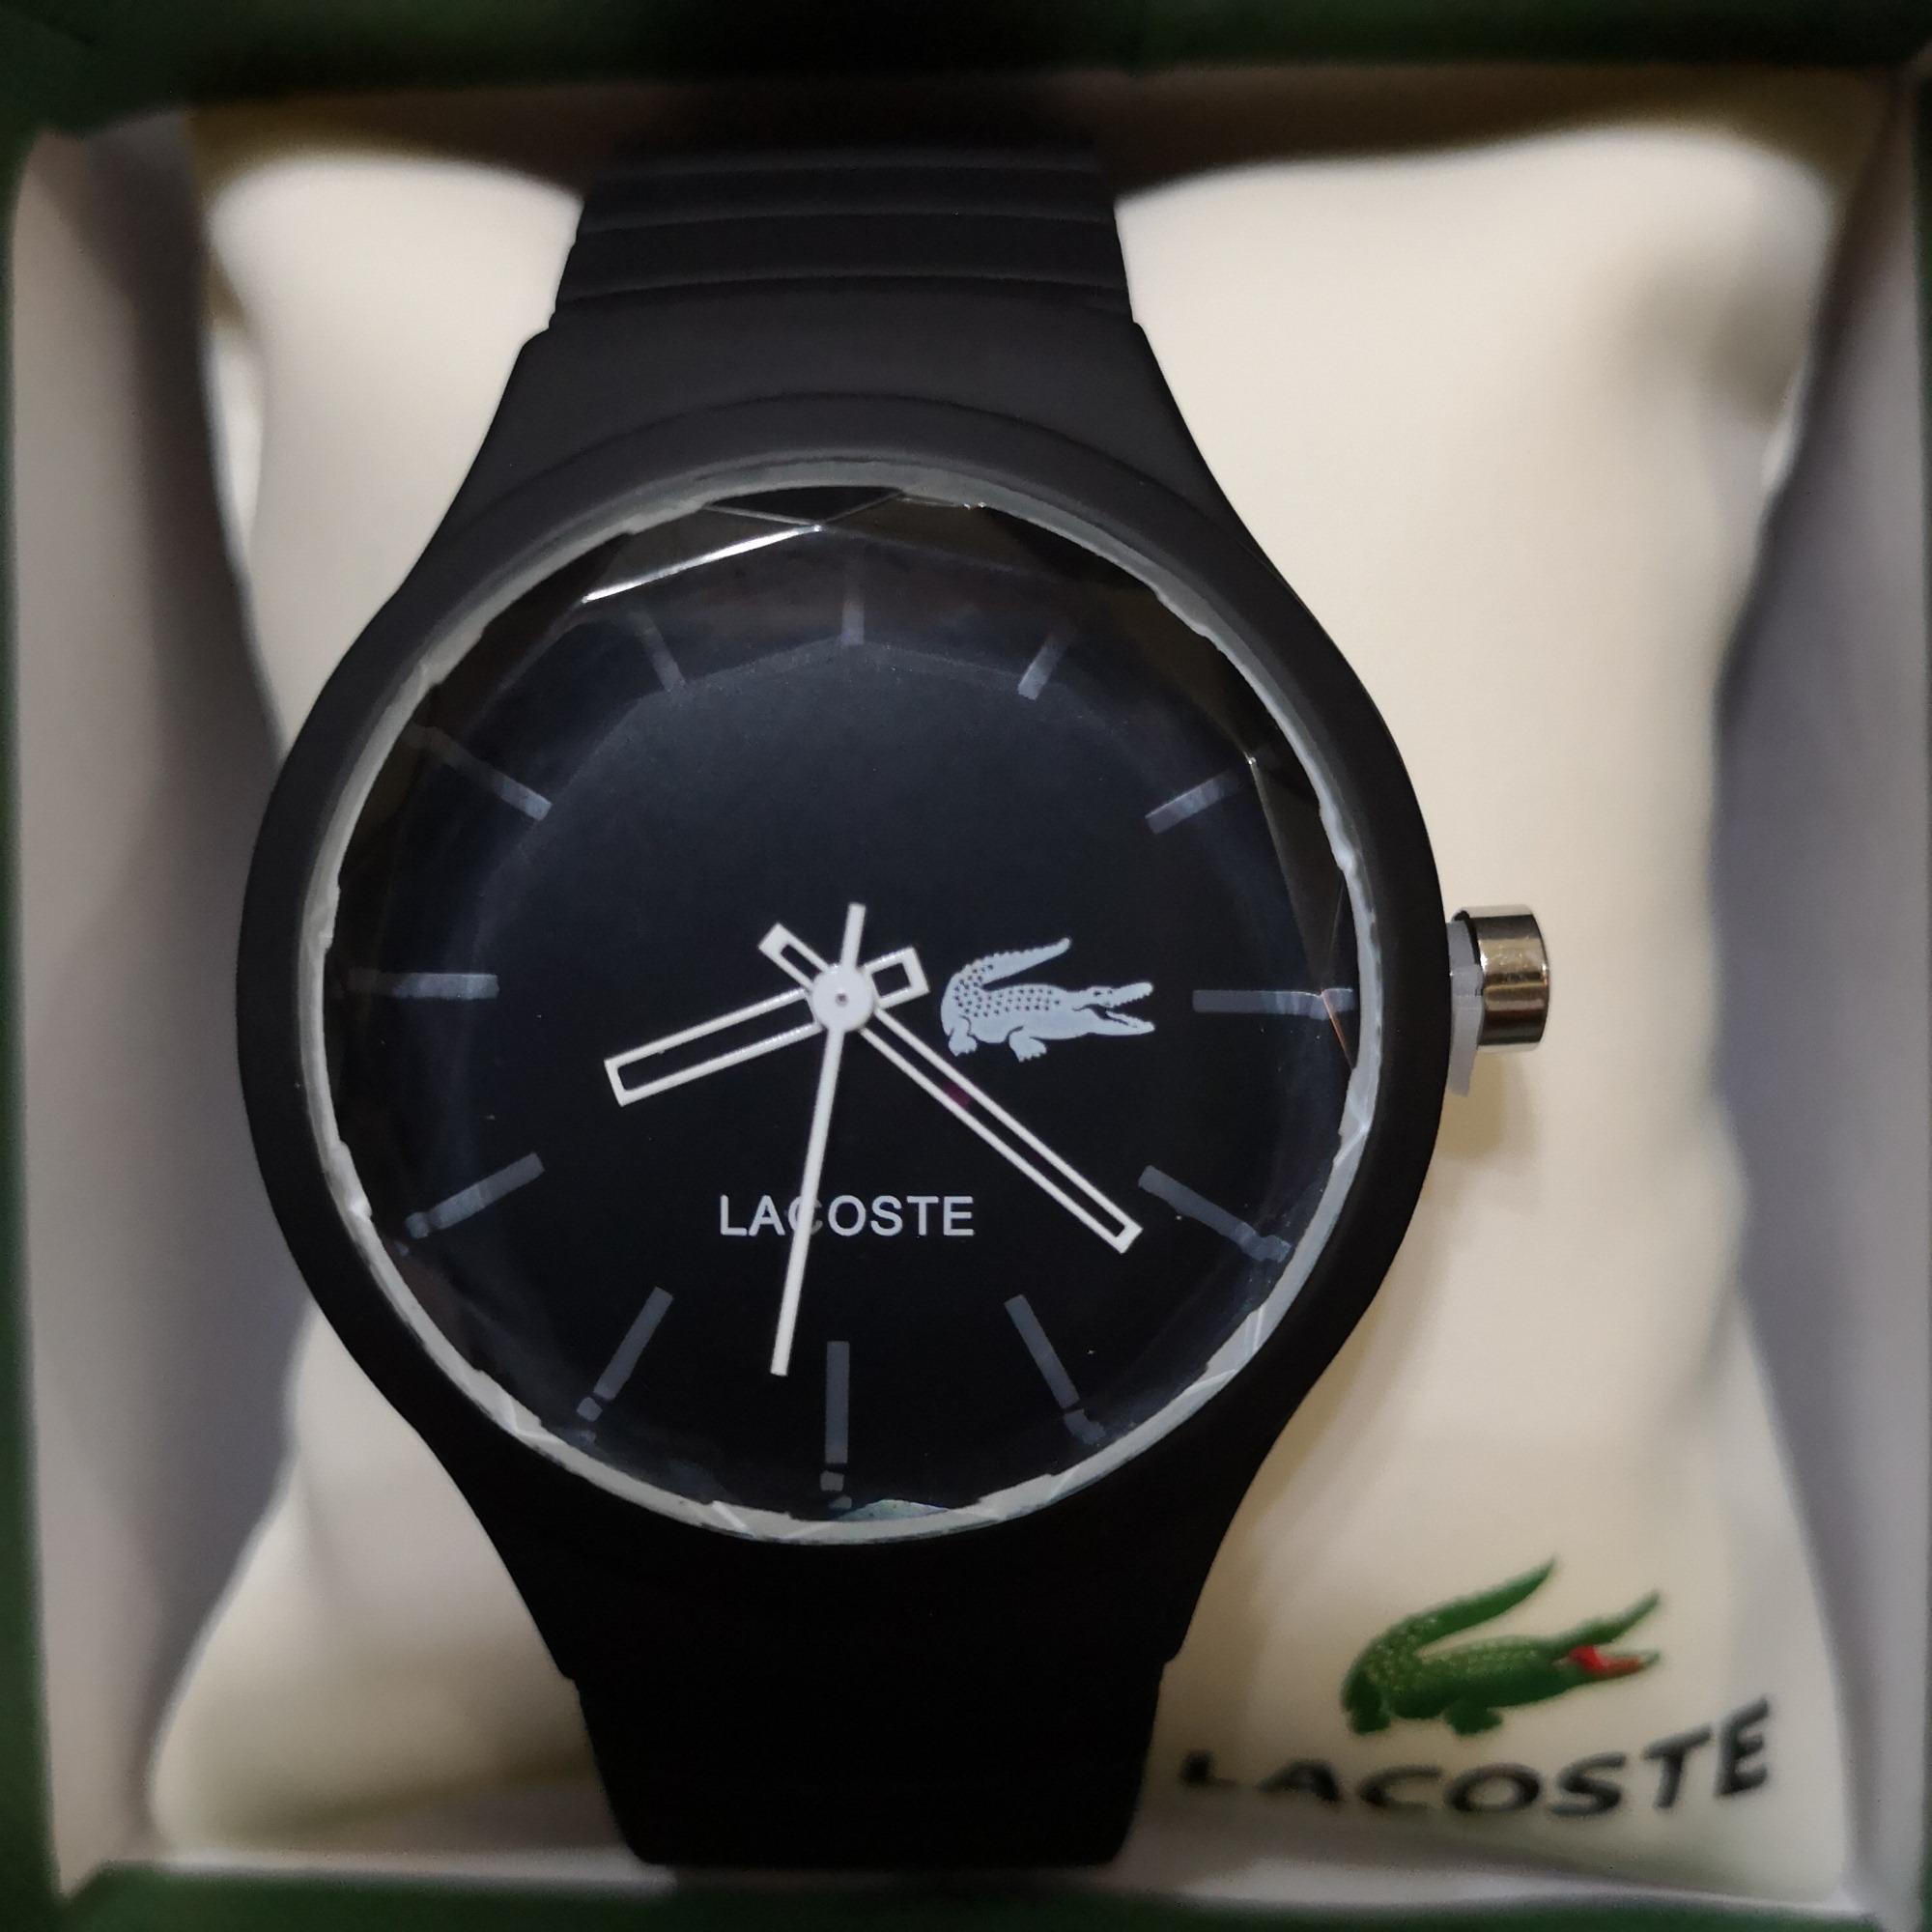 lacoste couple watch